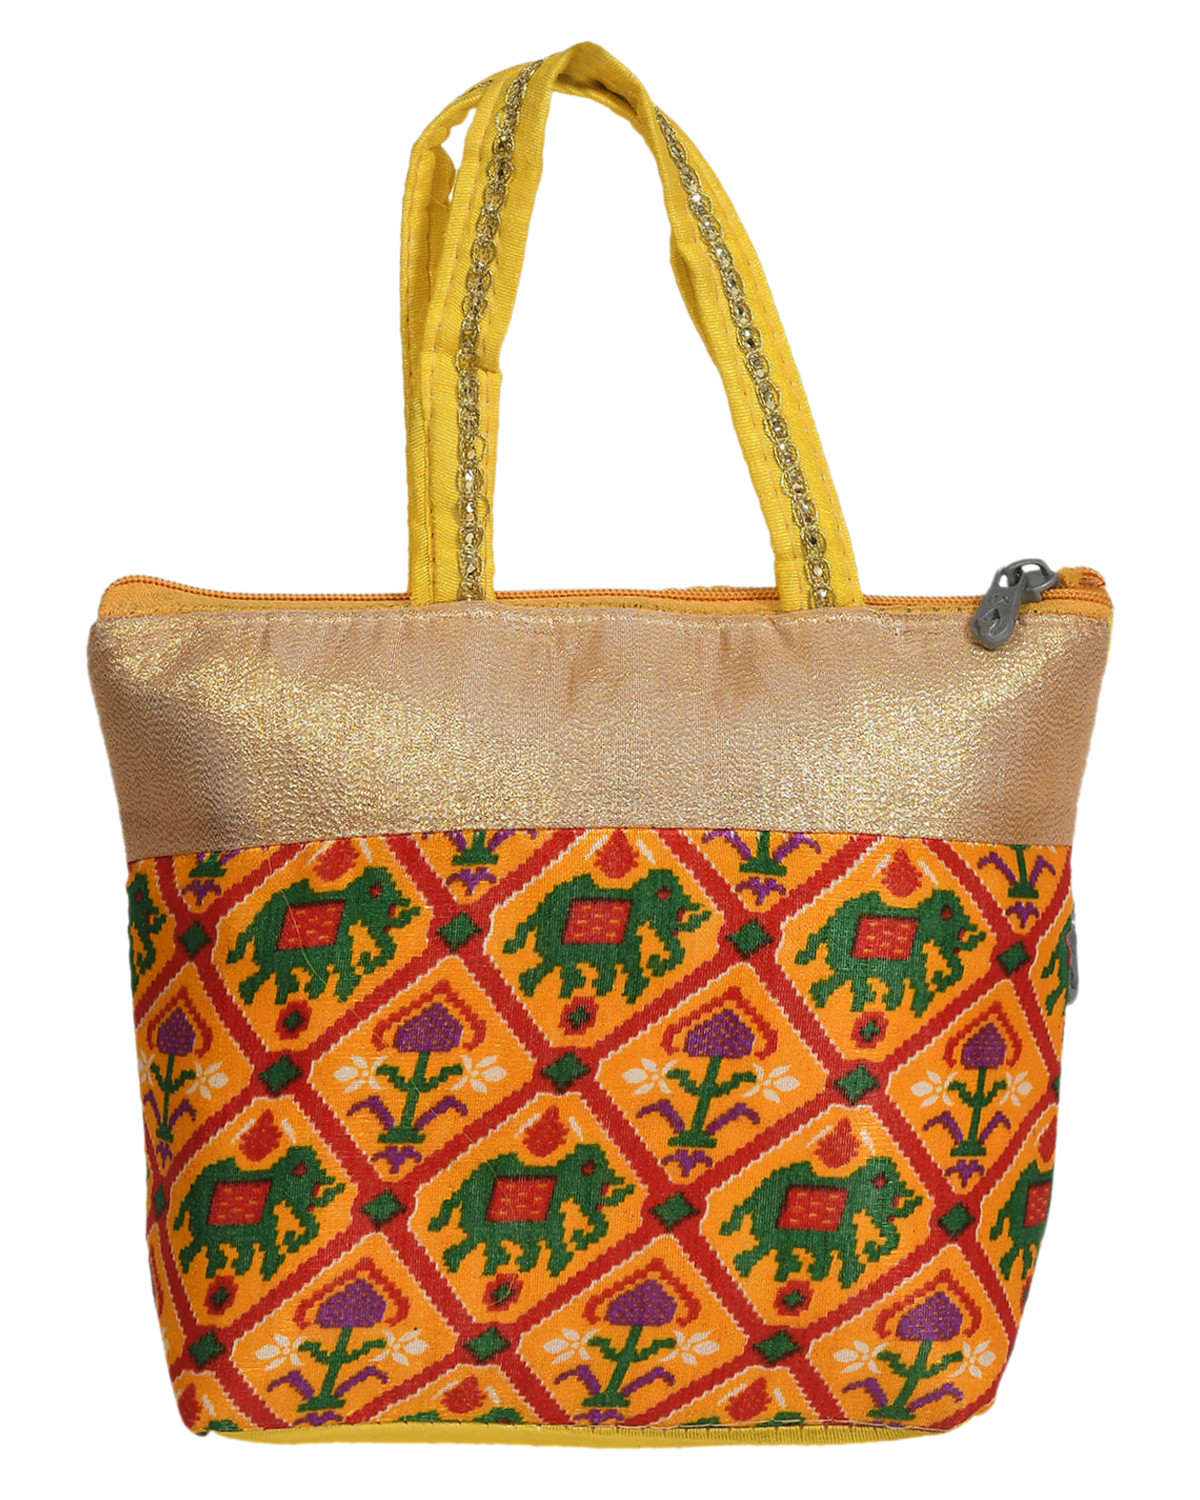 Kuber Industries Polyester Elephant Print Hand Bag For Women/Girls With Handle Pack of 2 (Blue & Yellow) 54KM4037